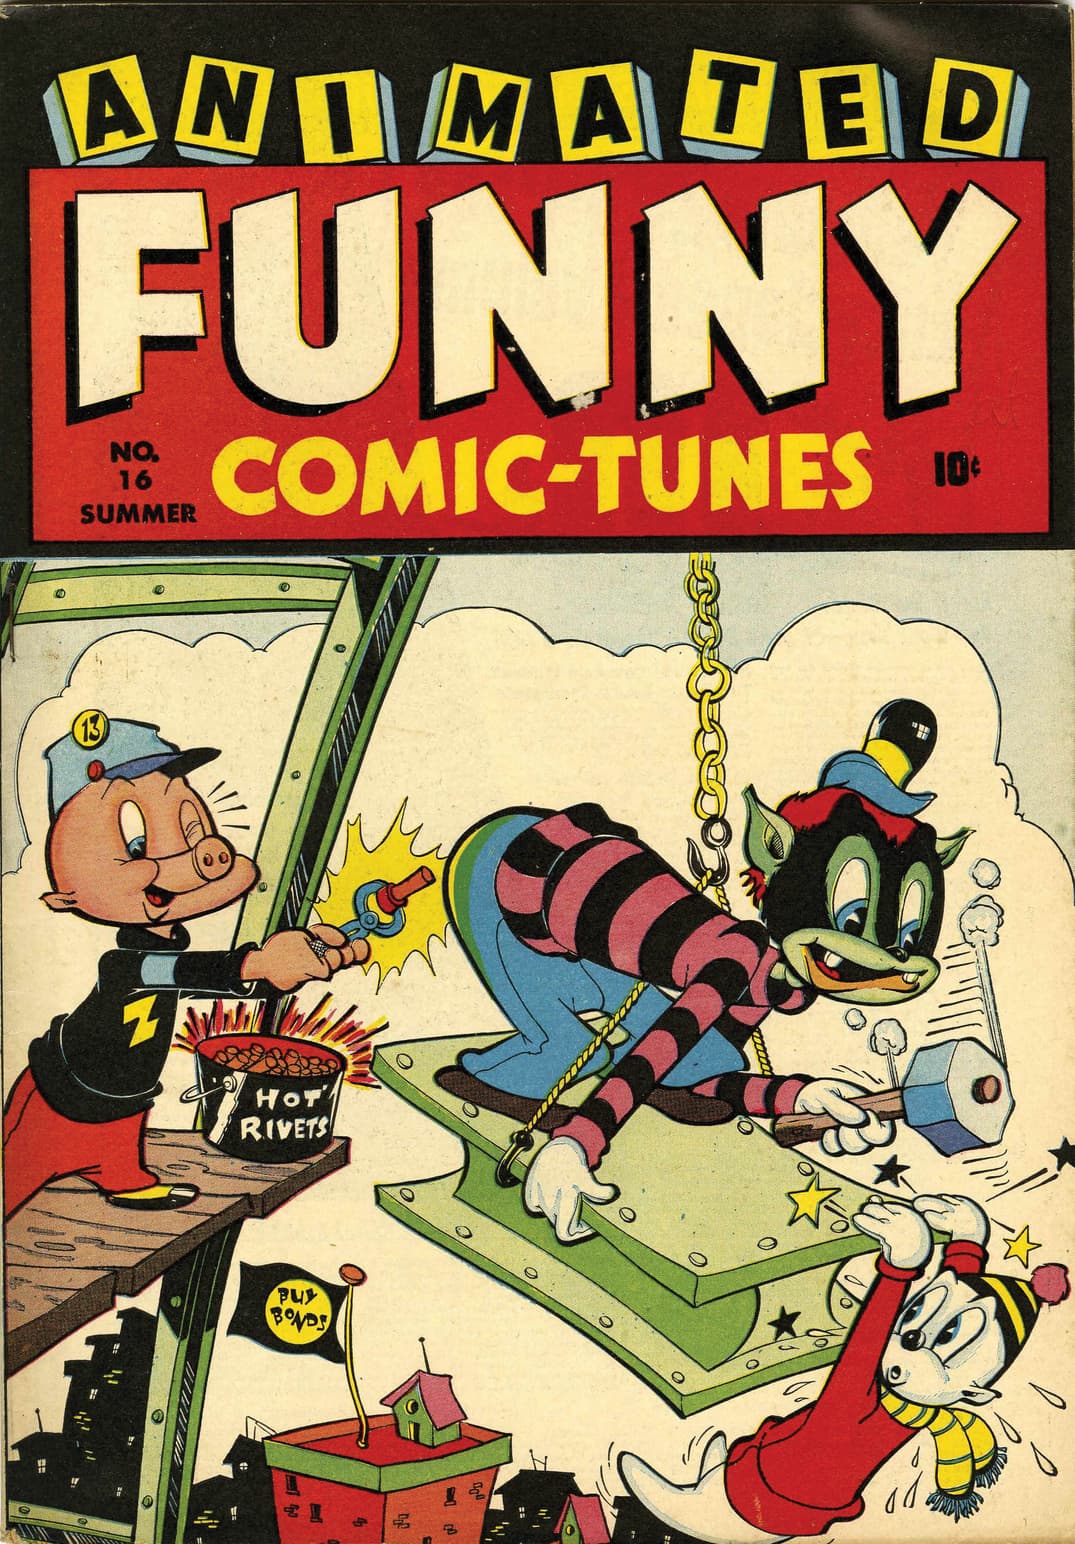 Animated Funny Comic-Tunes cover